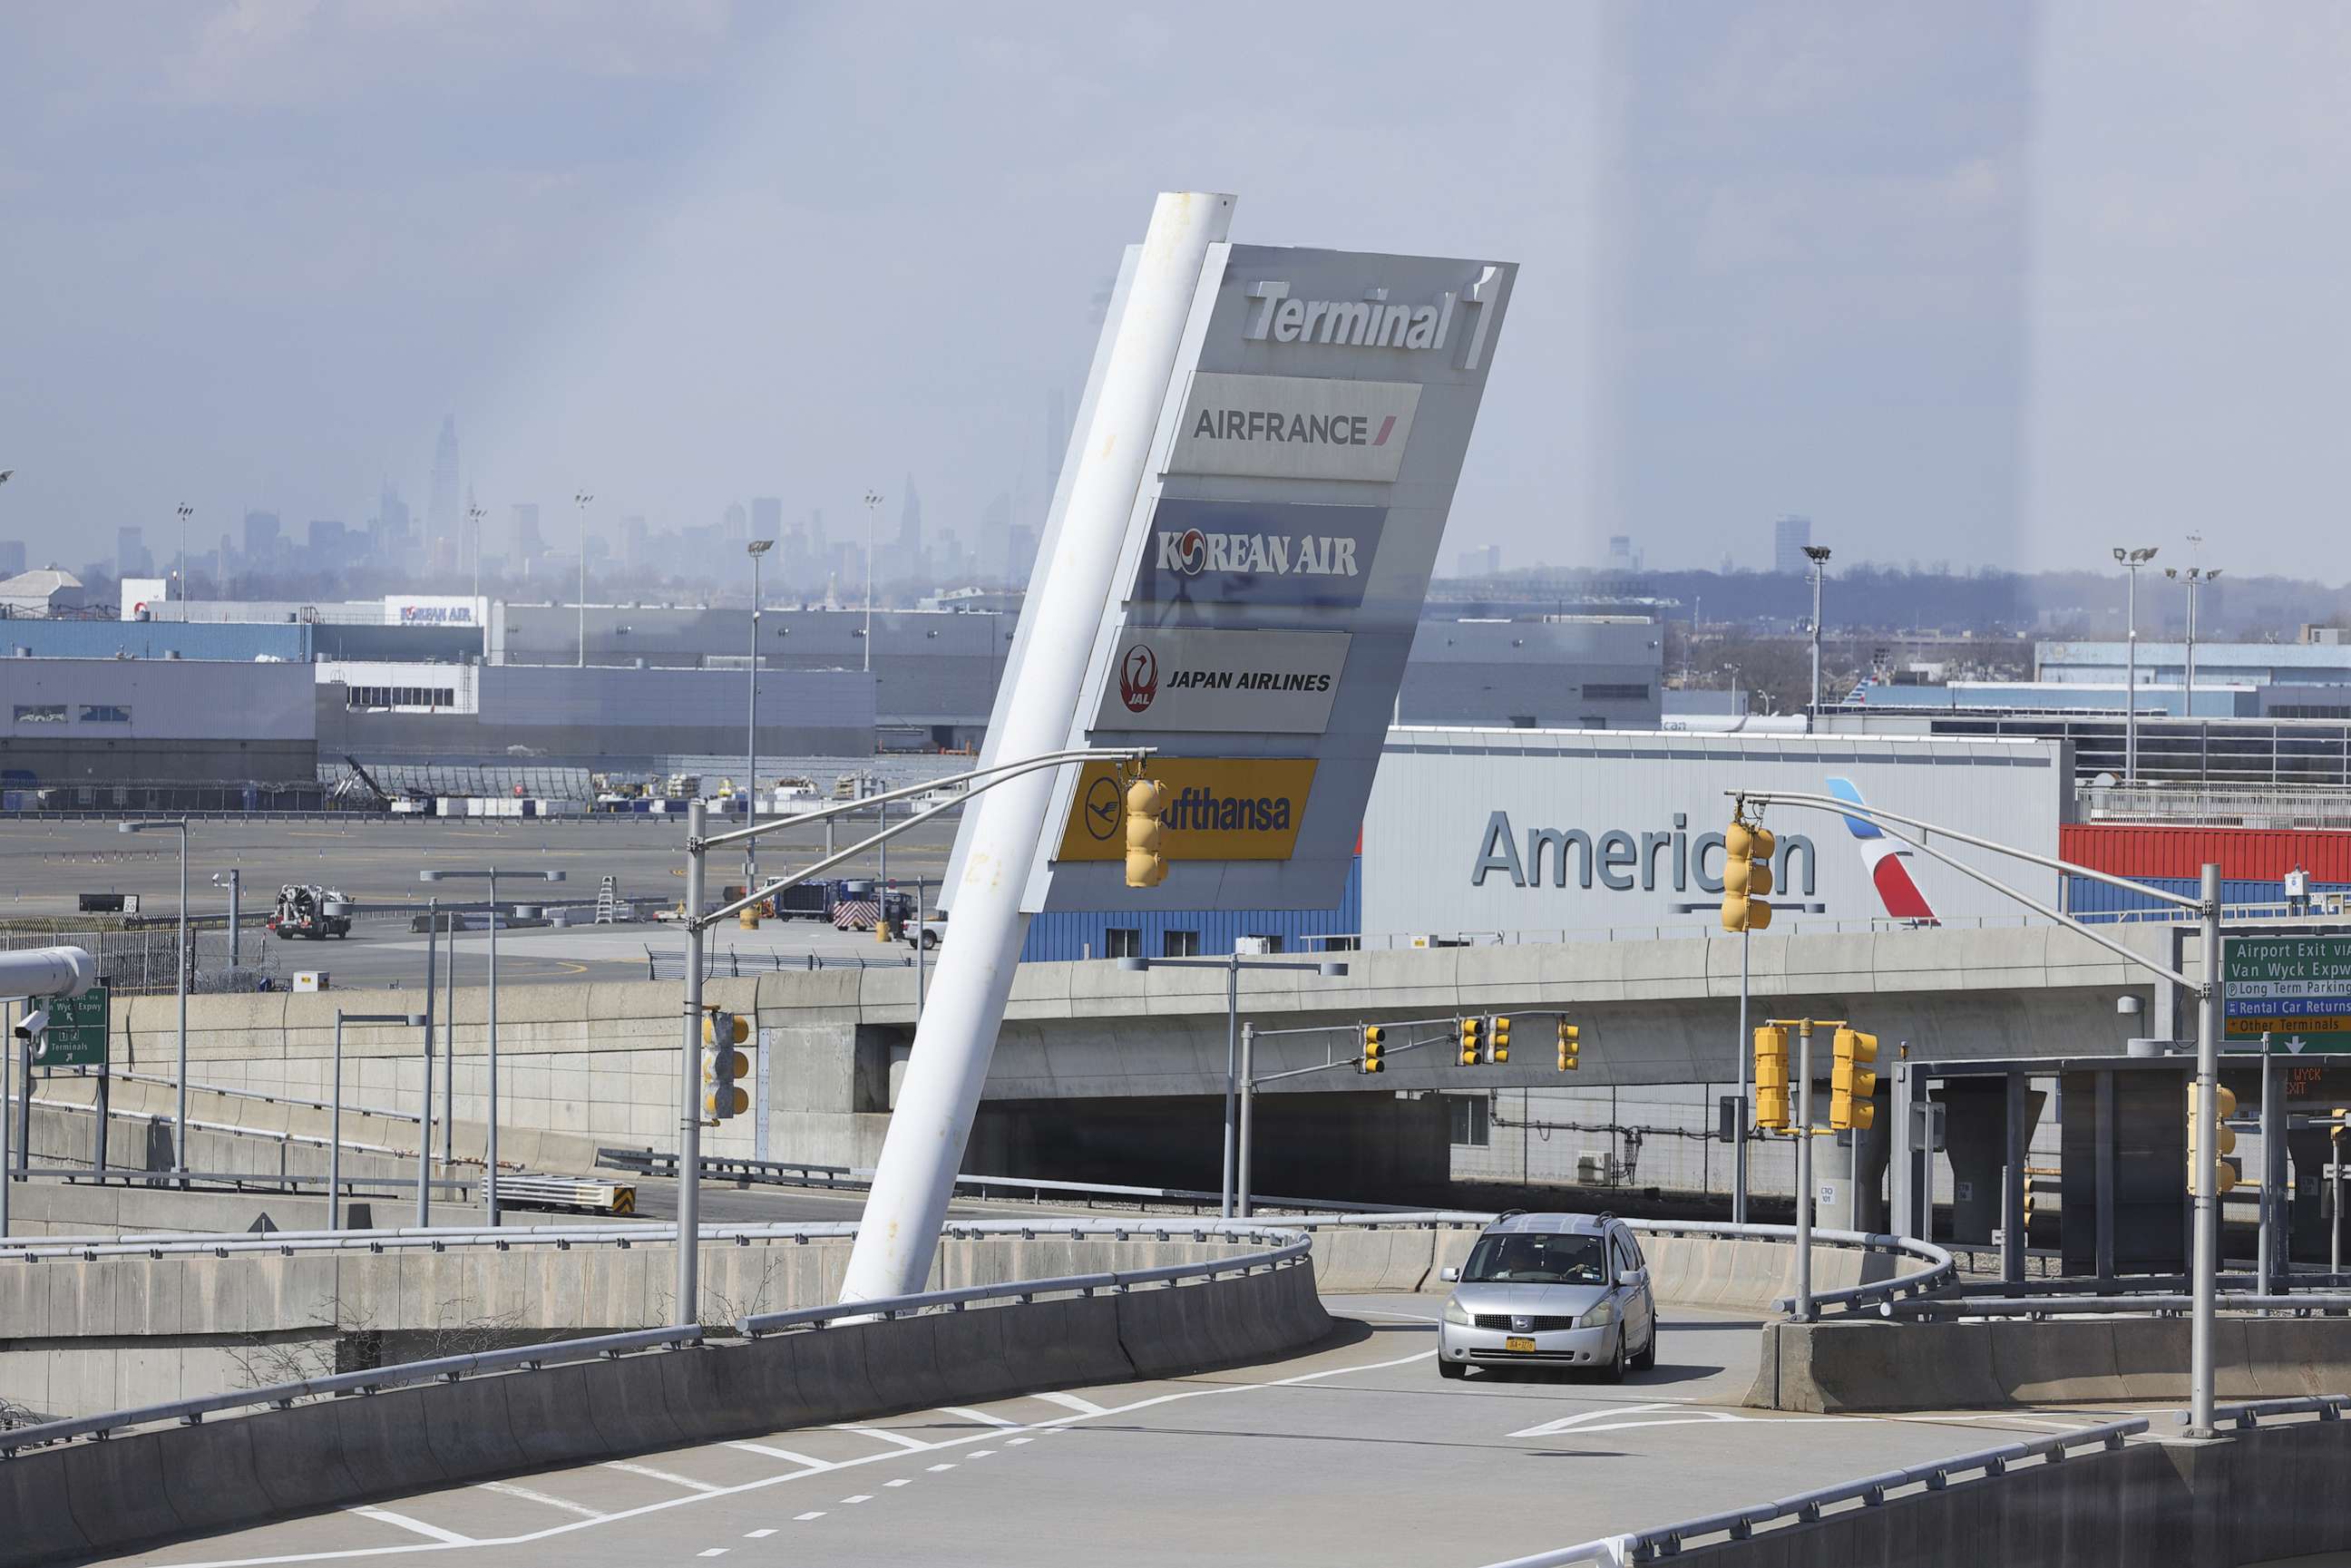 PHOTO: In this March 26, 2021 file photo airline signage outside Terminal 1 at John F. Kennedy International Airport (JFK) in New York.